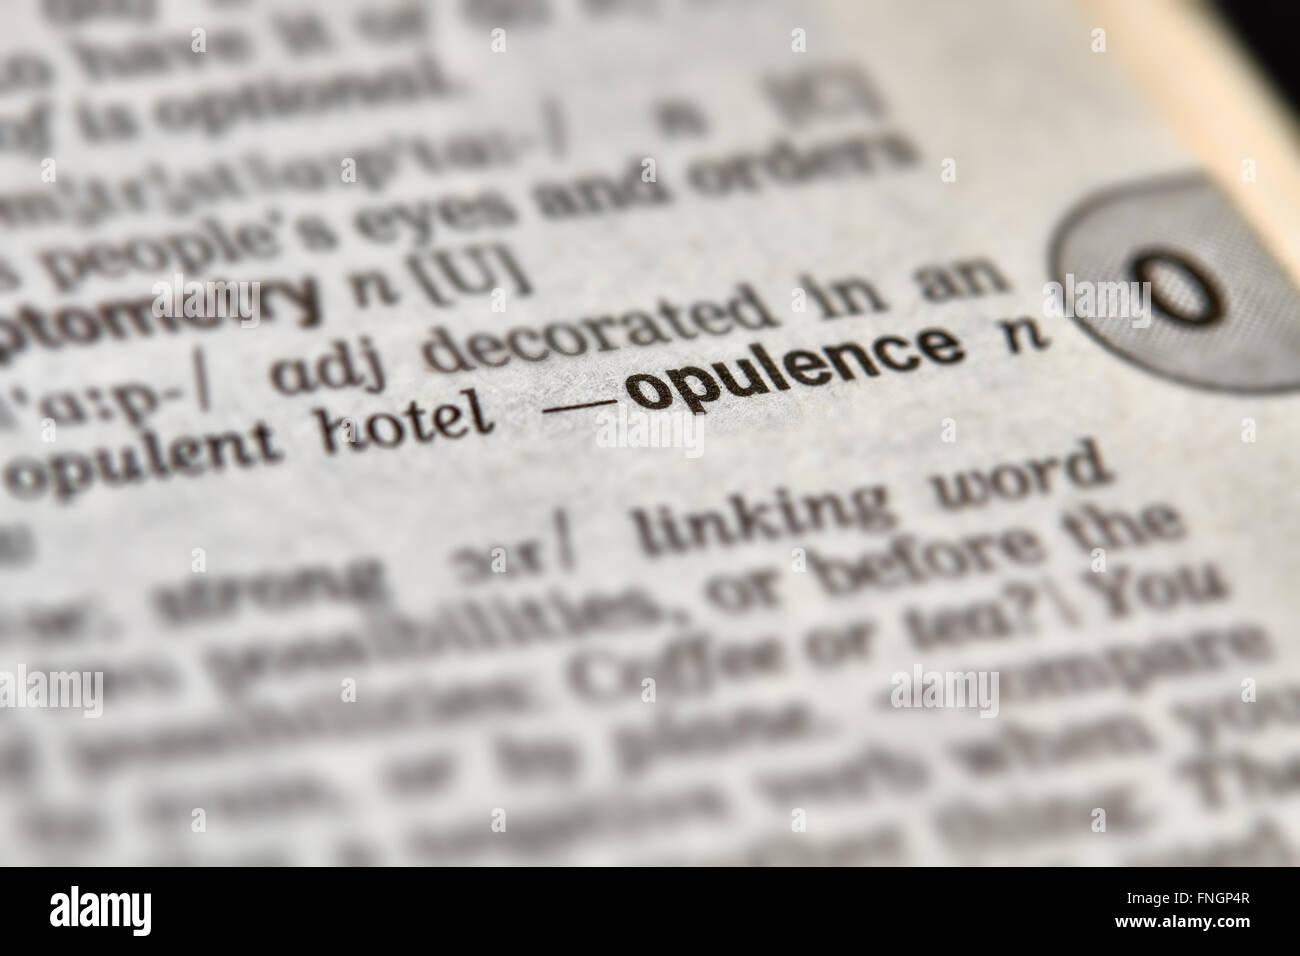 Opulence Word Definition Text in Dictionary Page Stock Photo